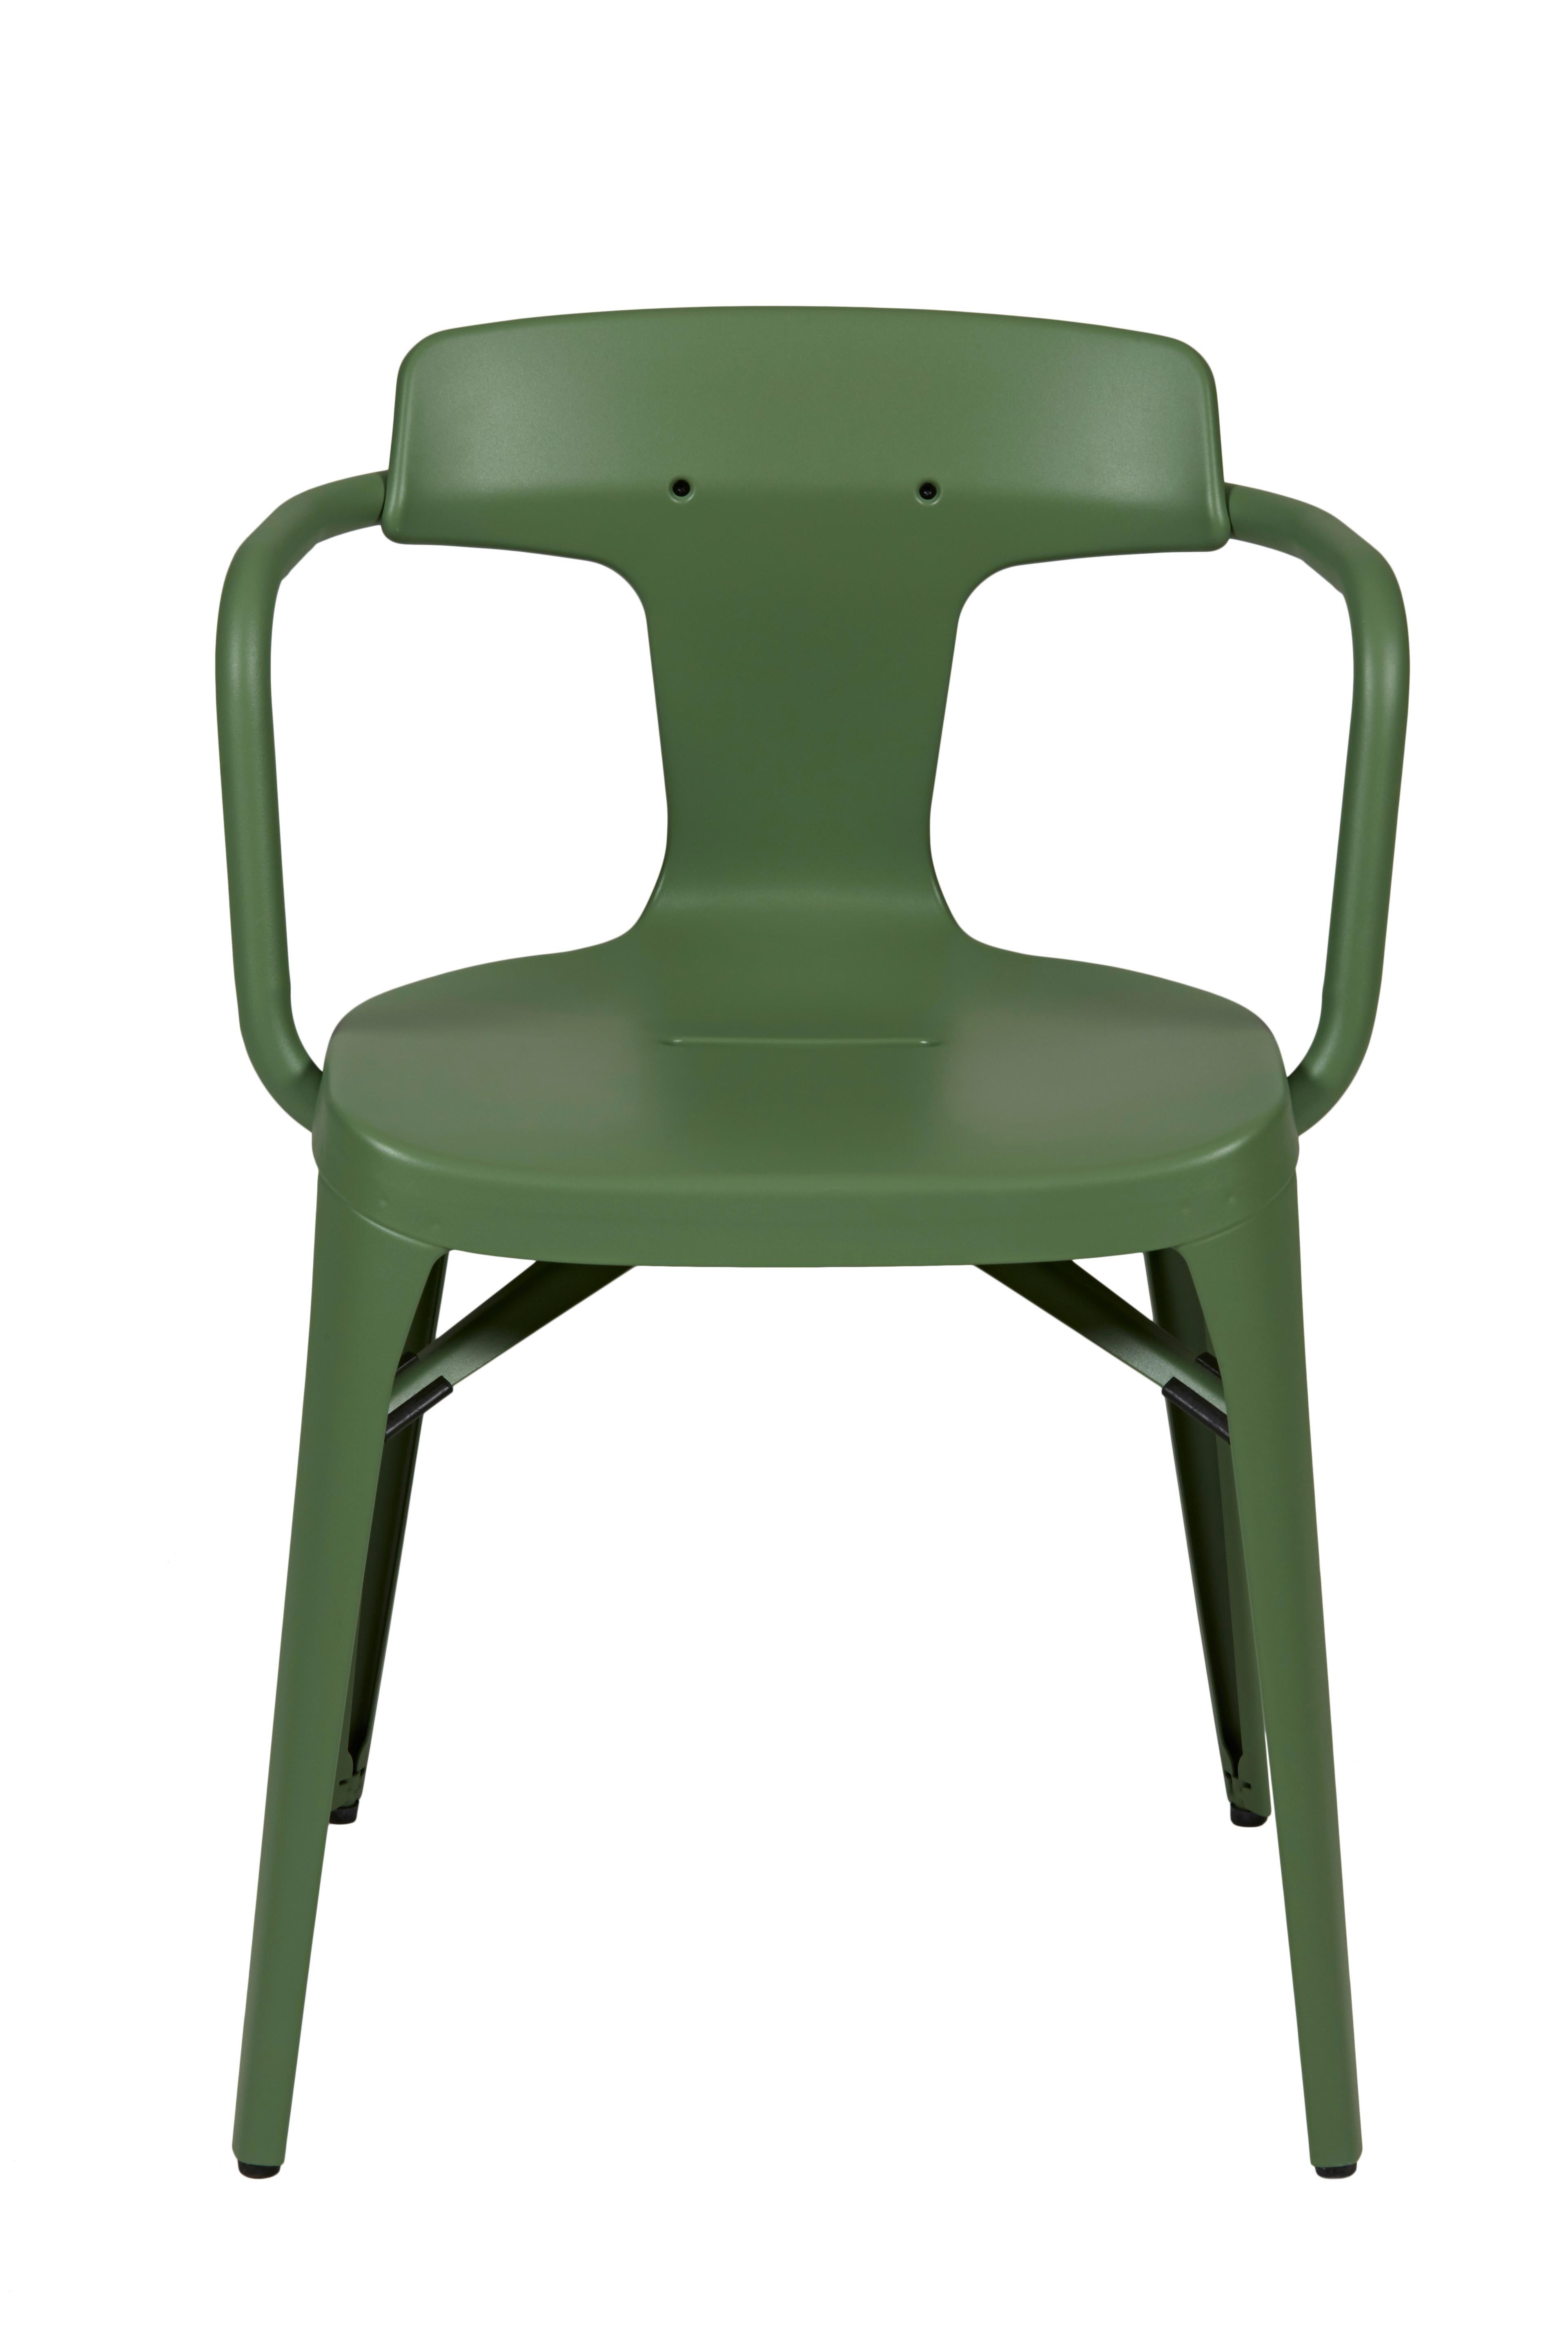 Im Angebot: T14 Chair in Pop Colors by Patrick Norguet and Tolix, Green (Romarin)